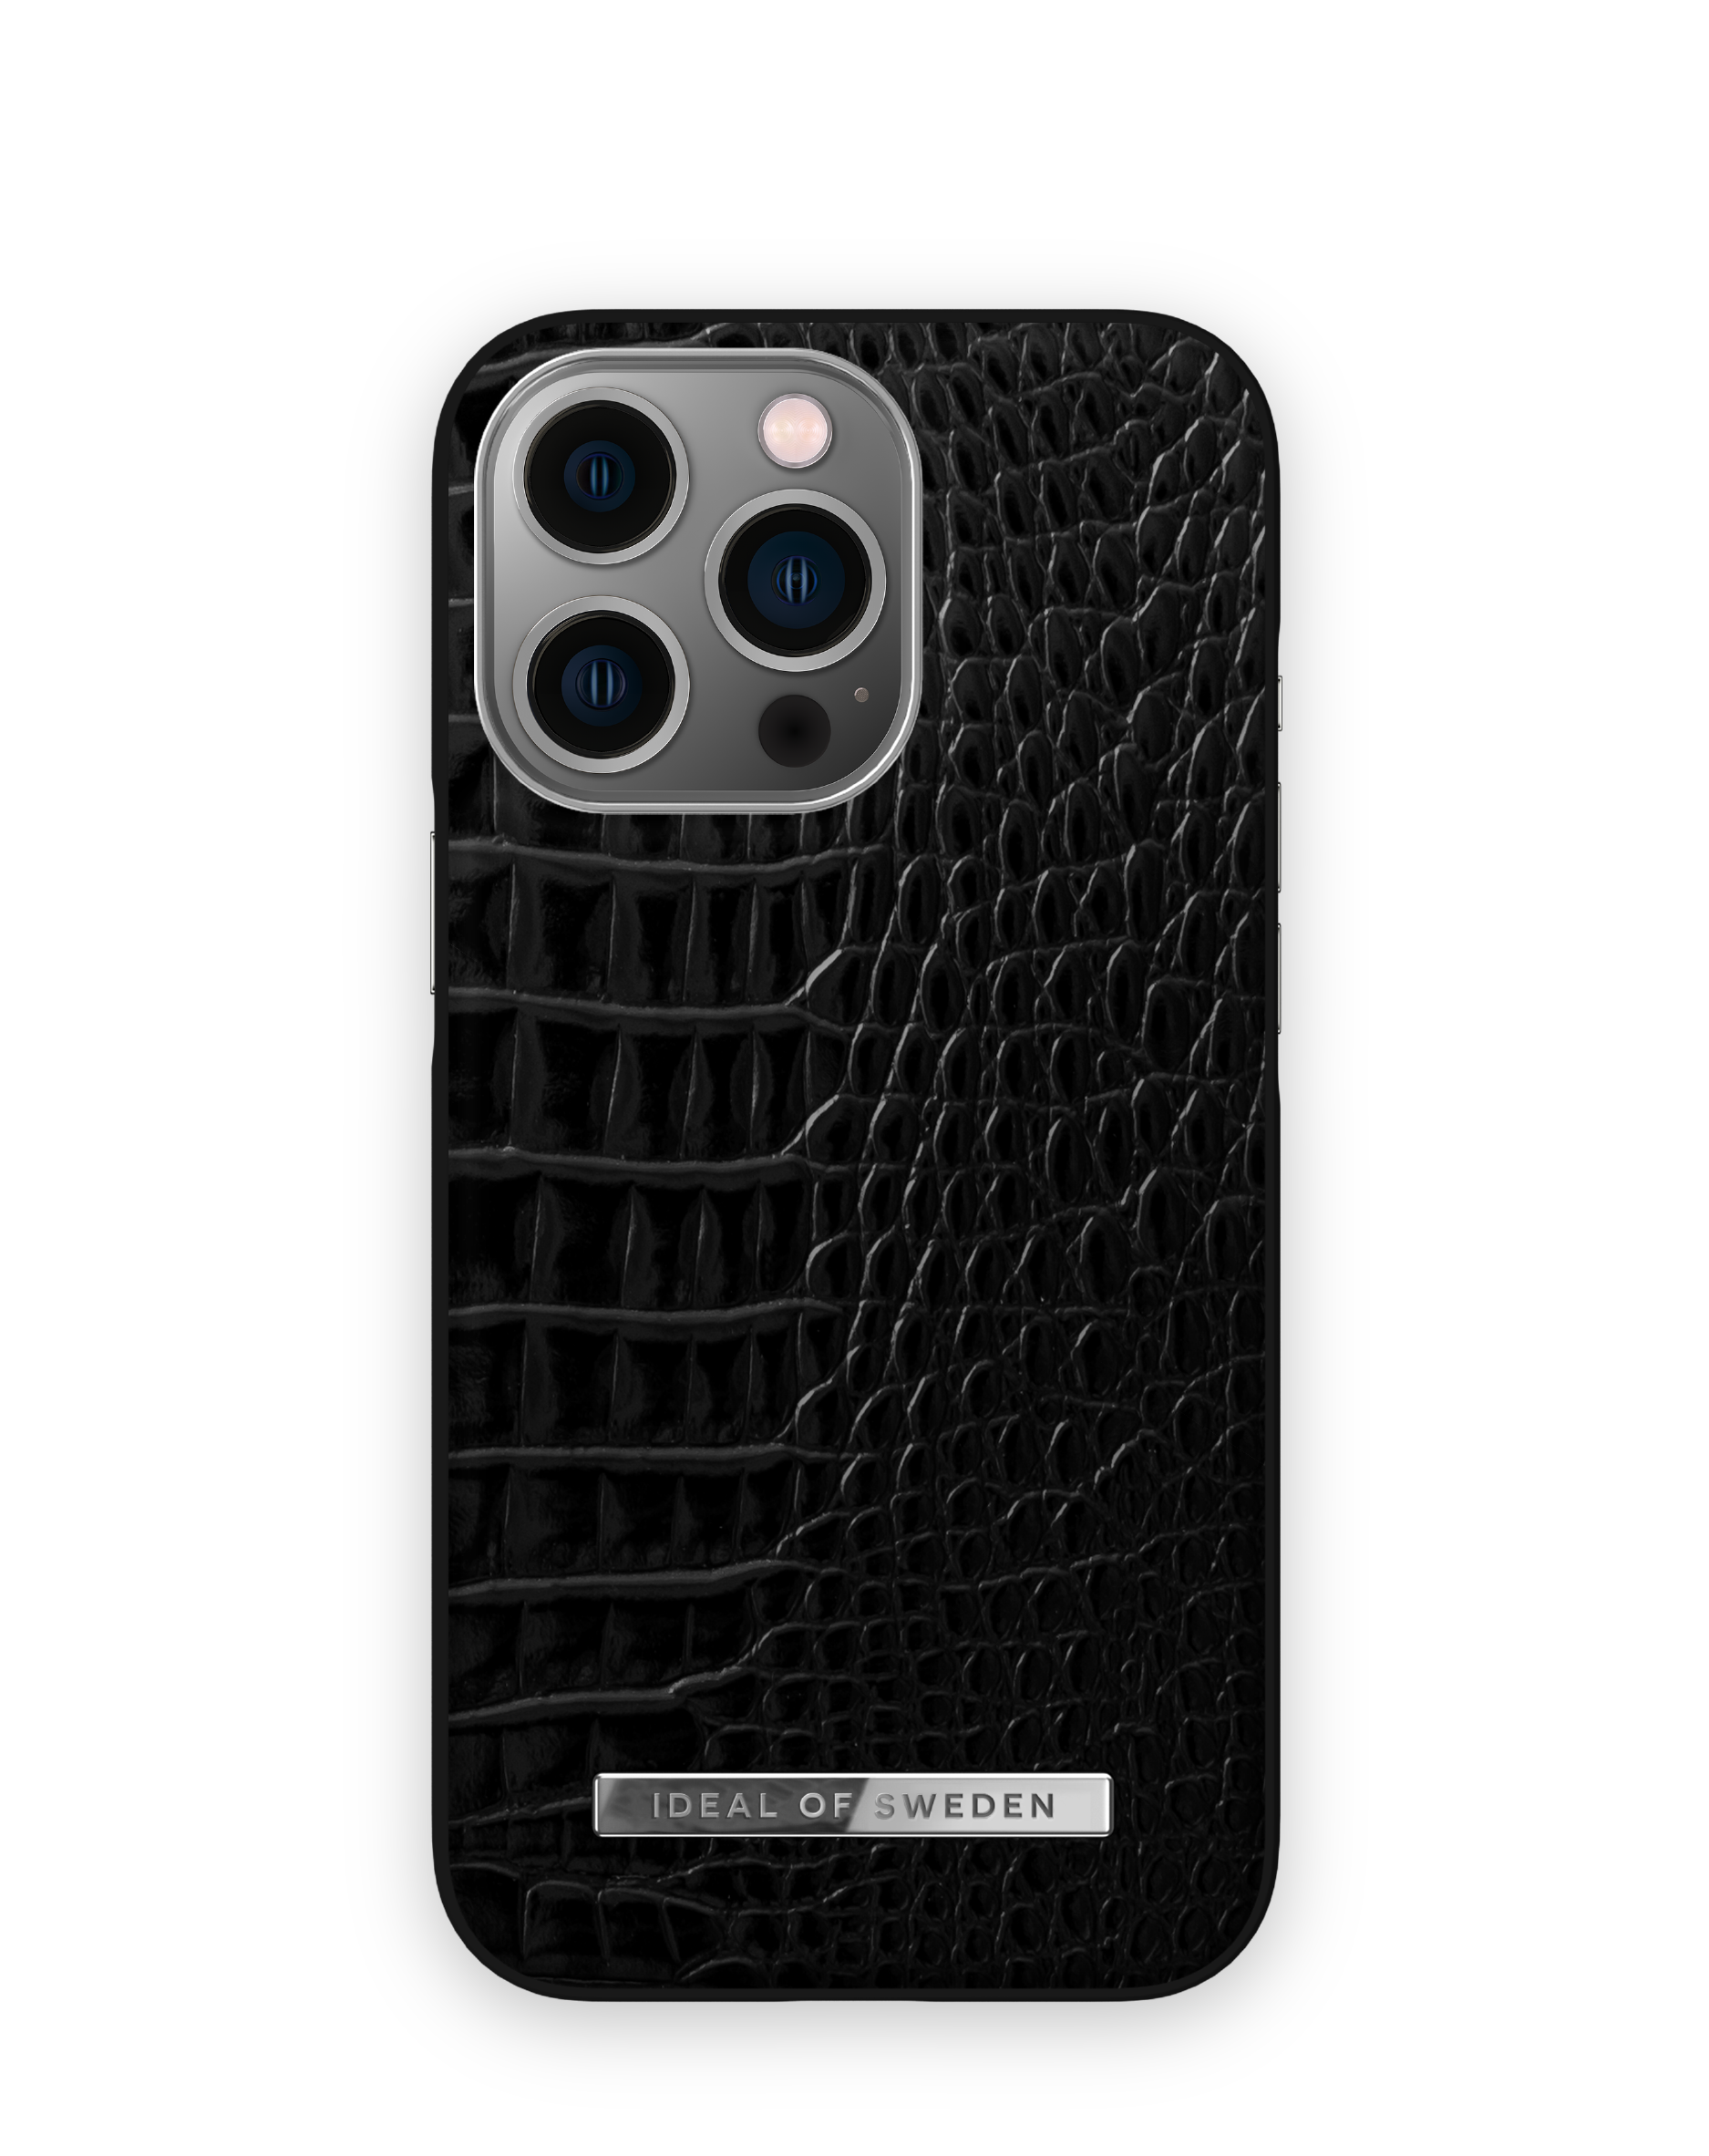 IDEAL OF SWEDEN 13 IDACSS21-I2161P-306, iPhone Backcover, Pro, Noir Silver Apple, Neo Croco